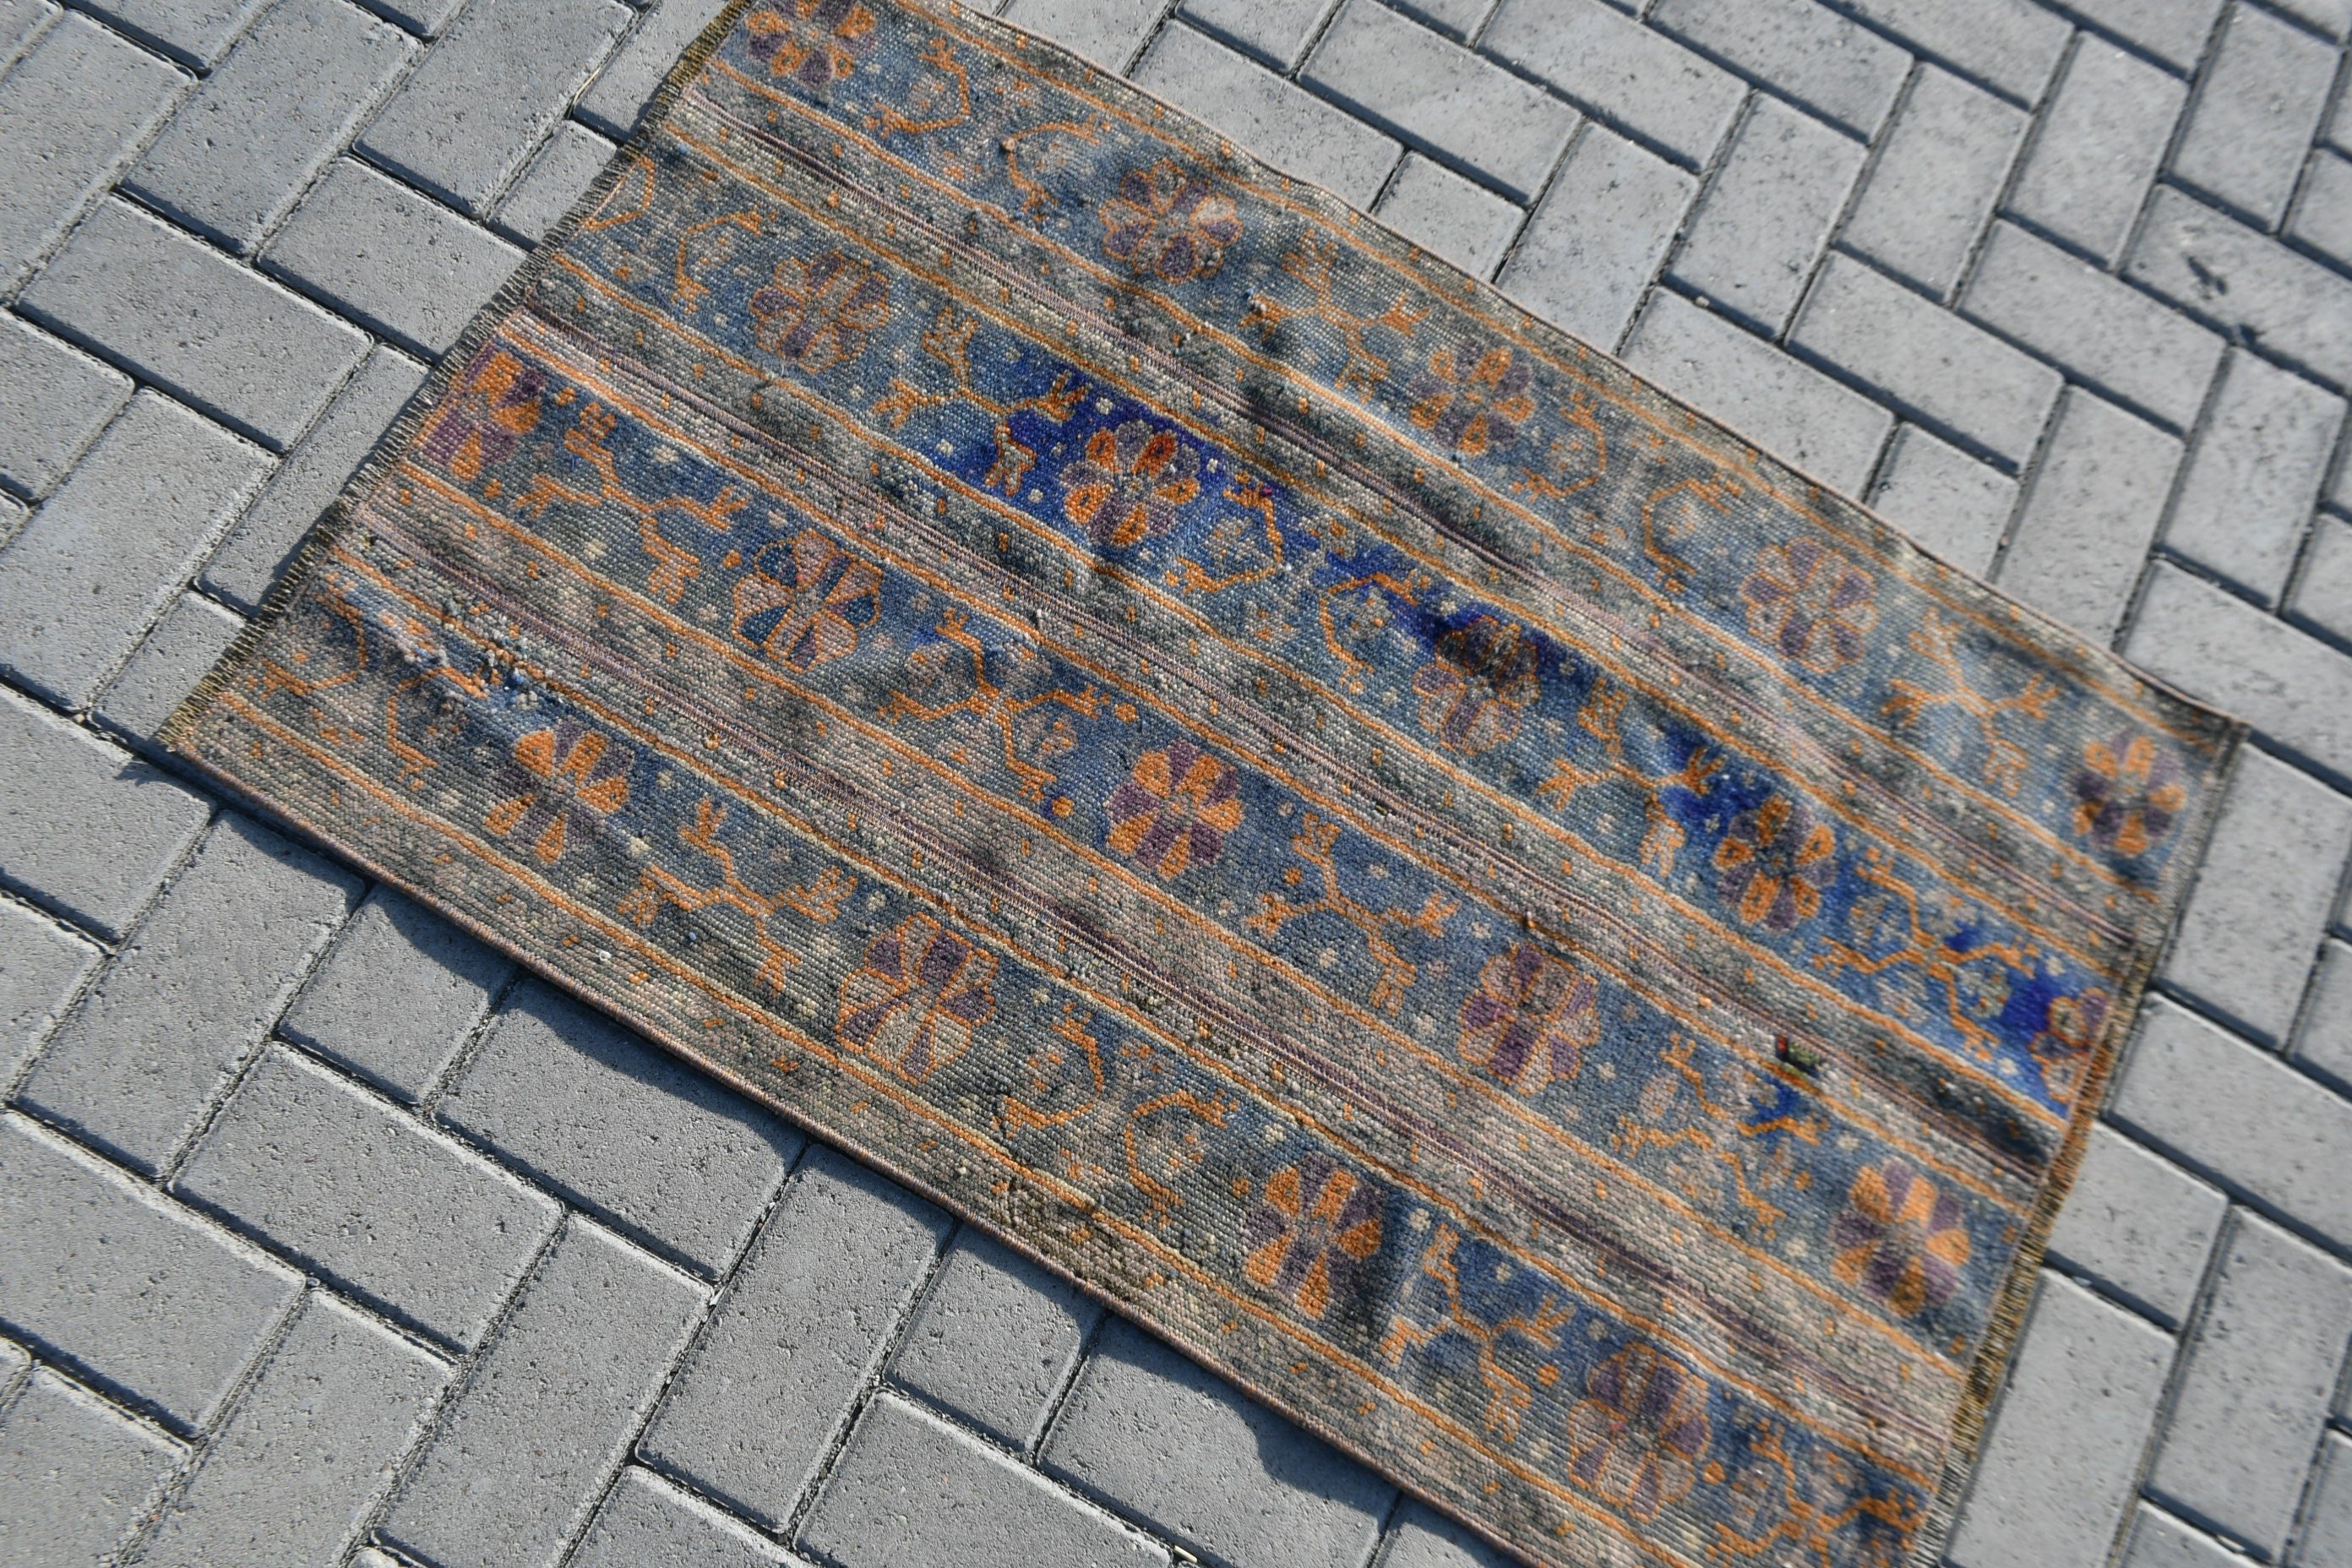 Wool Rug, Rugs for Car Mat, Blue Home Decor Rugs, Bath Rugs, Vintage Rugs, Turkish Rugs, Oriental Rugs, Car Mat Rugs, 2.4x3.7 ft Small Rug